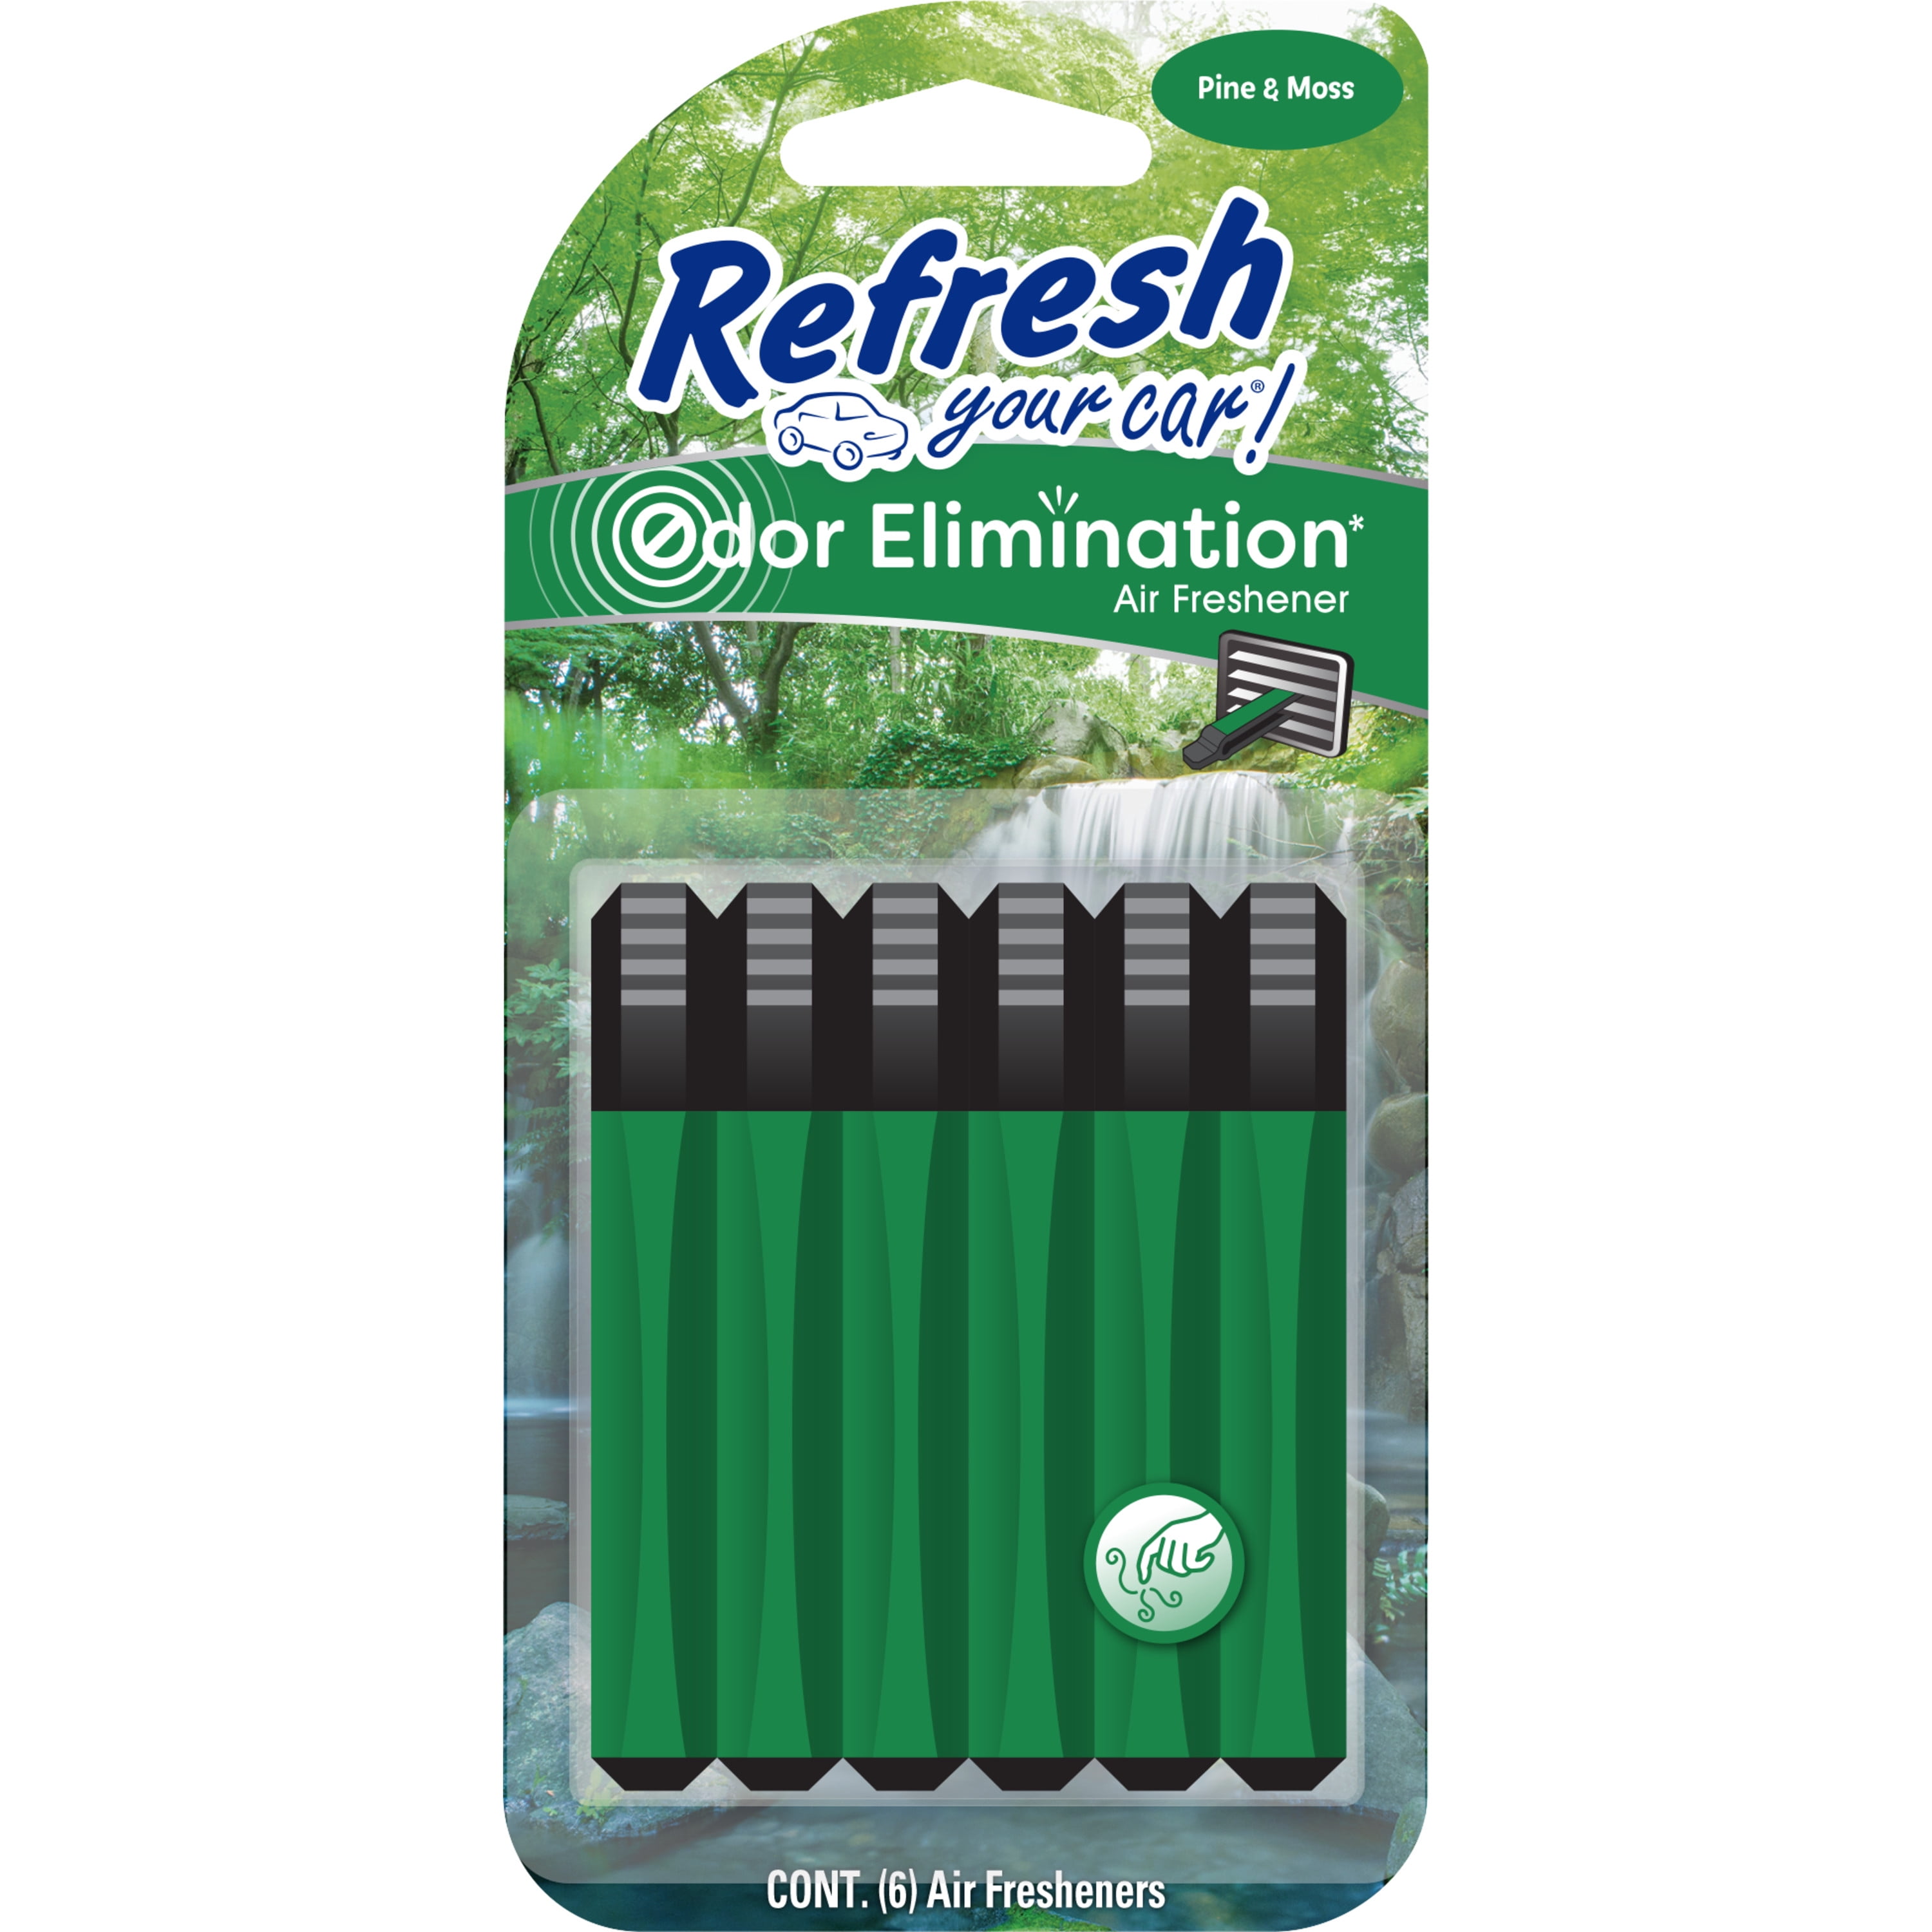 Refresh Your Car! Vent Stick Air Freshener (Pine & Moss Scent, 6 Pack)